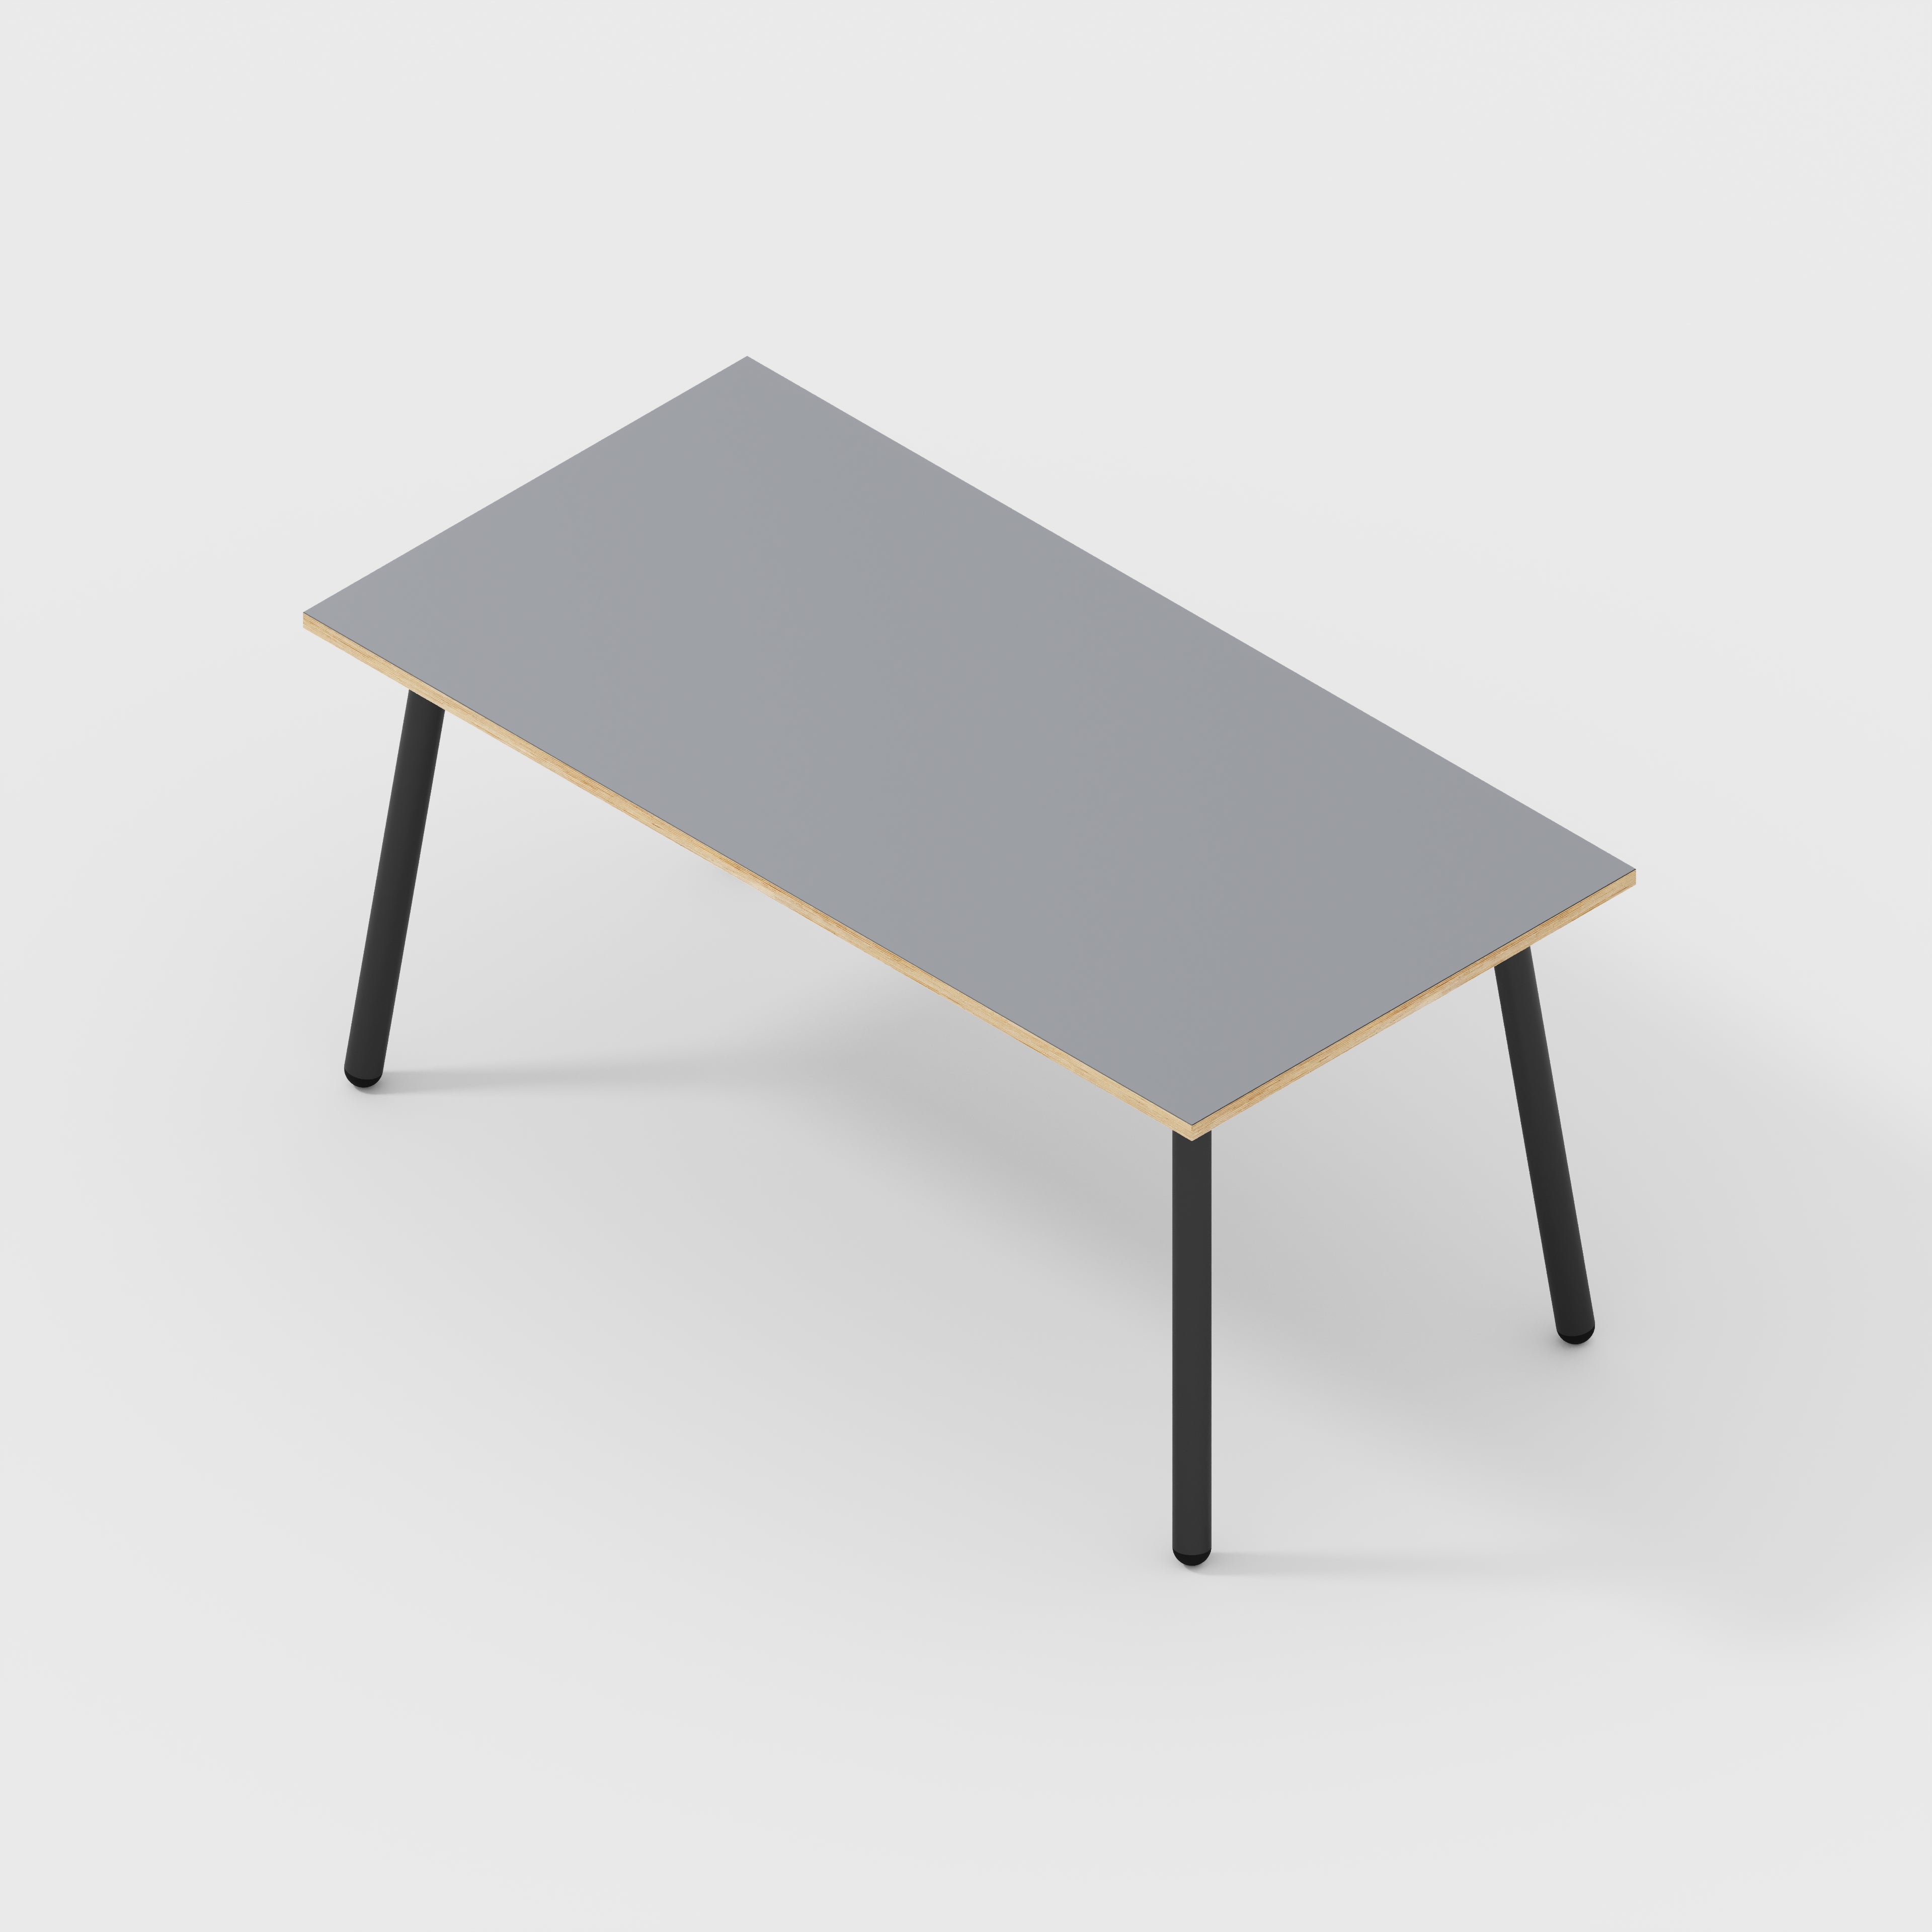 Table with Black Round Single Pin Legs - Formica Tornado Grey - 1600(w) x 800(d) x 735(h)